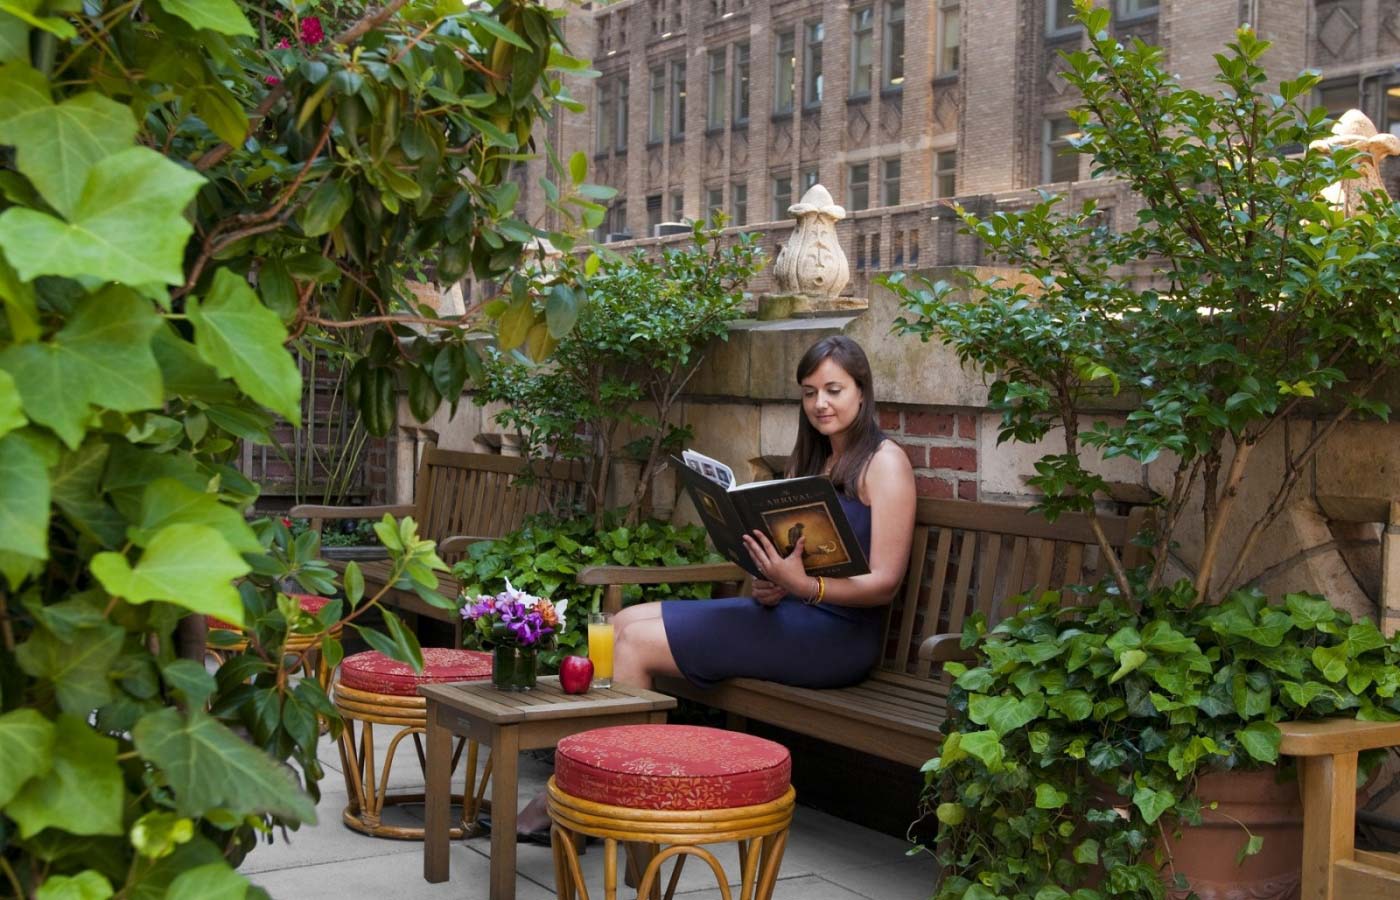 The Library Hotel is centrally located in Midtown Manhattan, within walking distance to many of New York City's top attractions, and around the corner from all forms of public transportation.